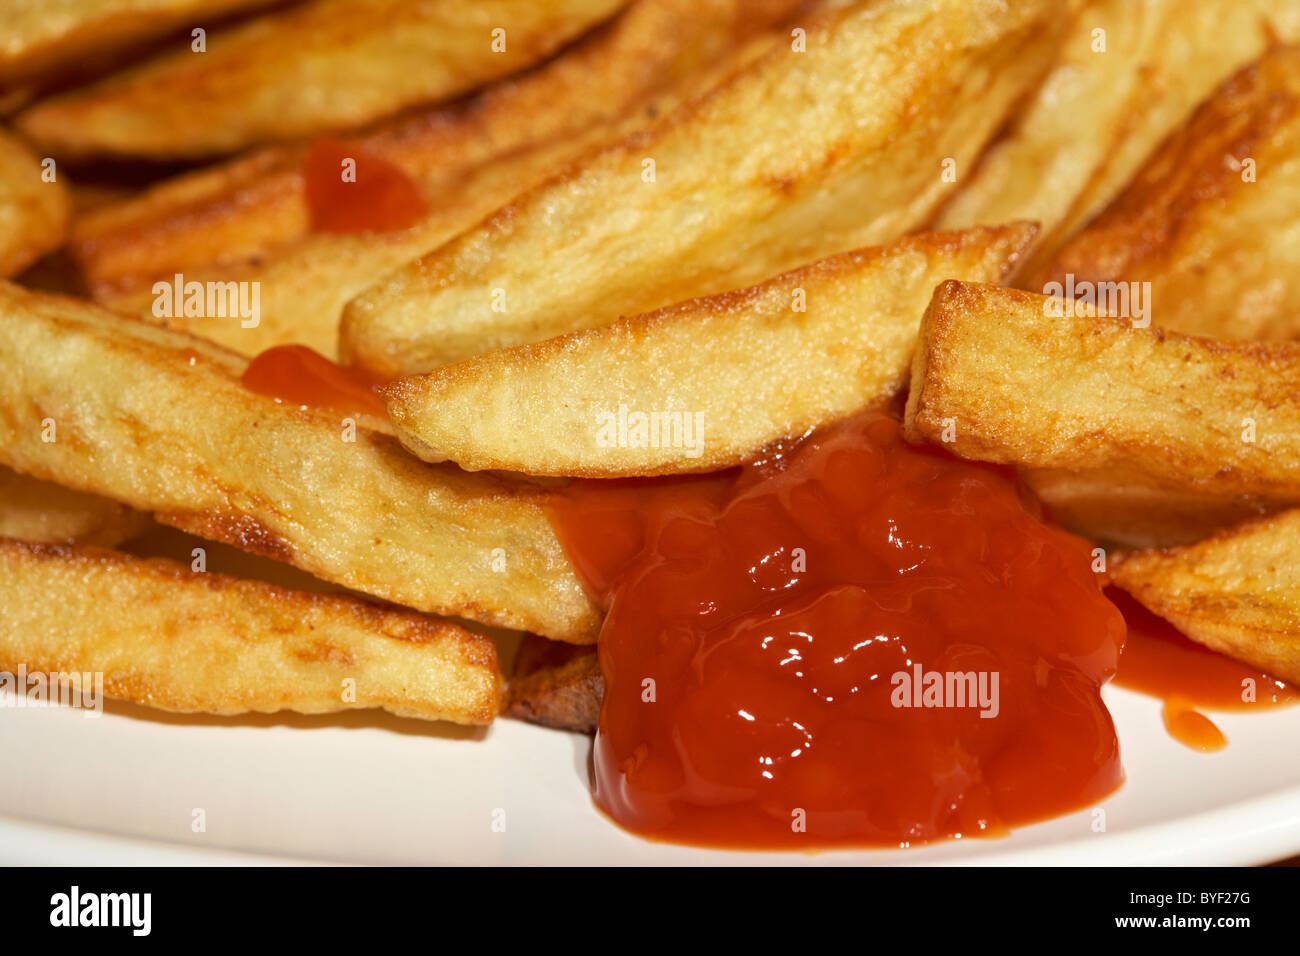 home made chips and tomato sauce ketchup on a plate in the uk Stock Photo